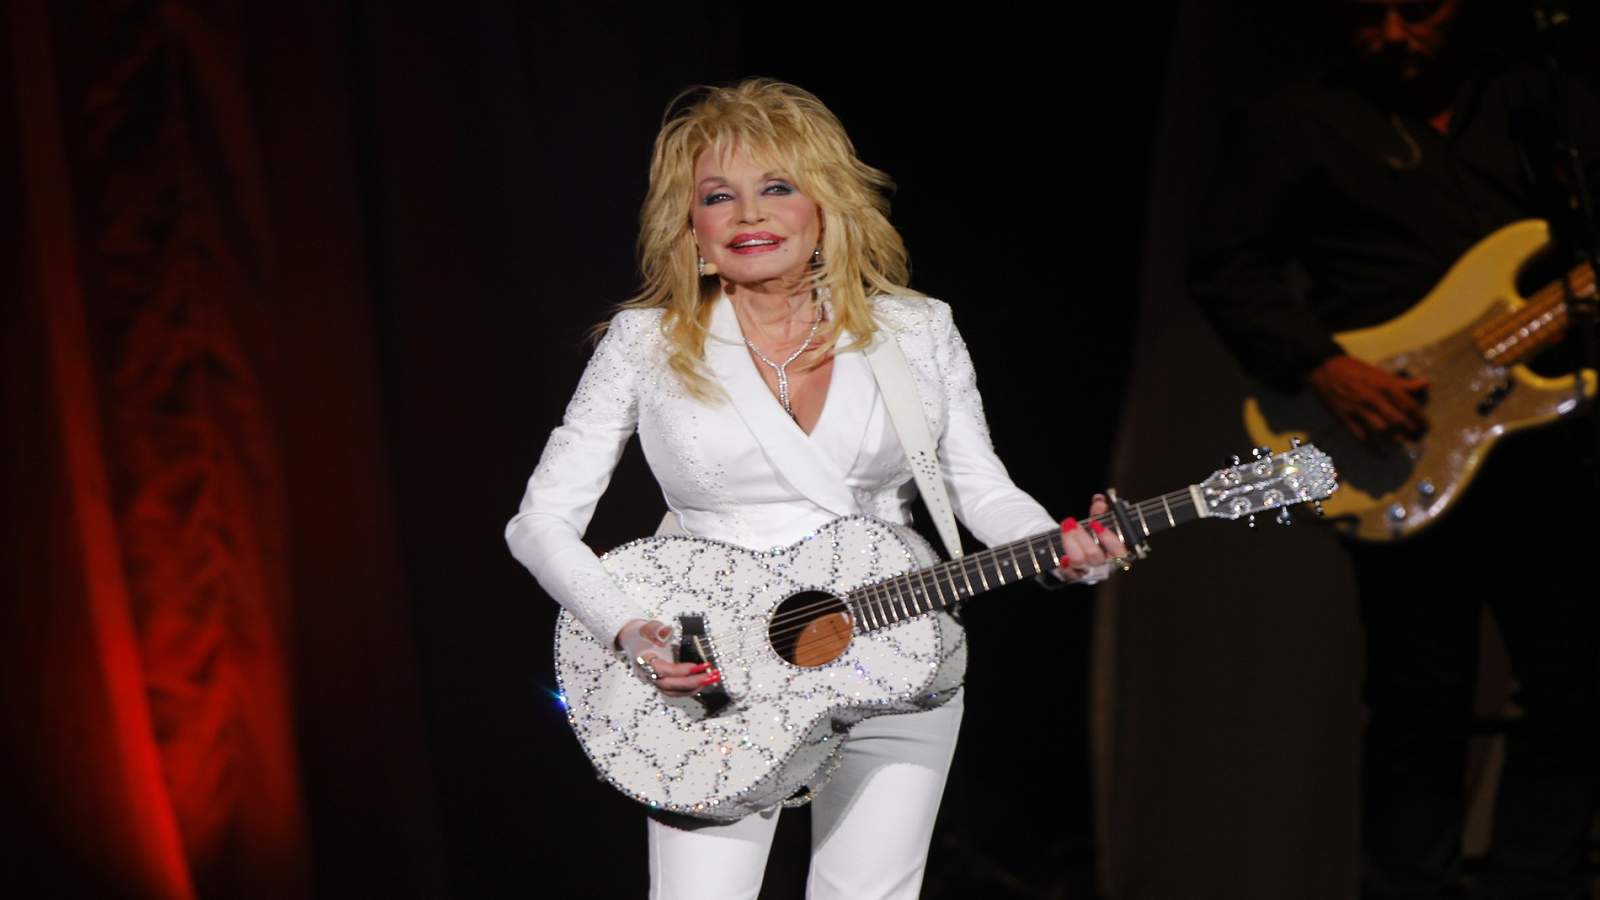 A Dolly Parton song could become one state’s official anthem